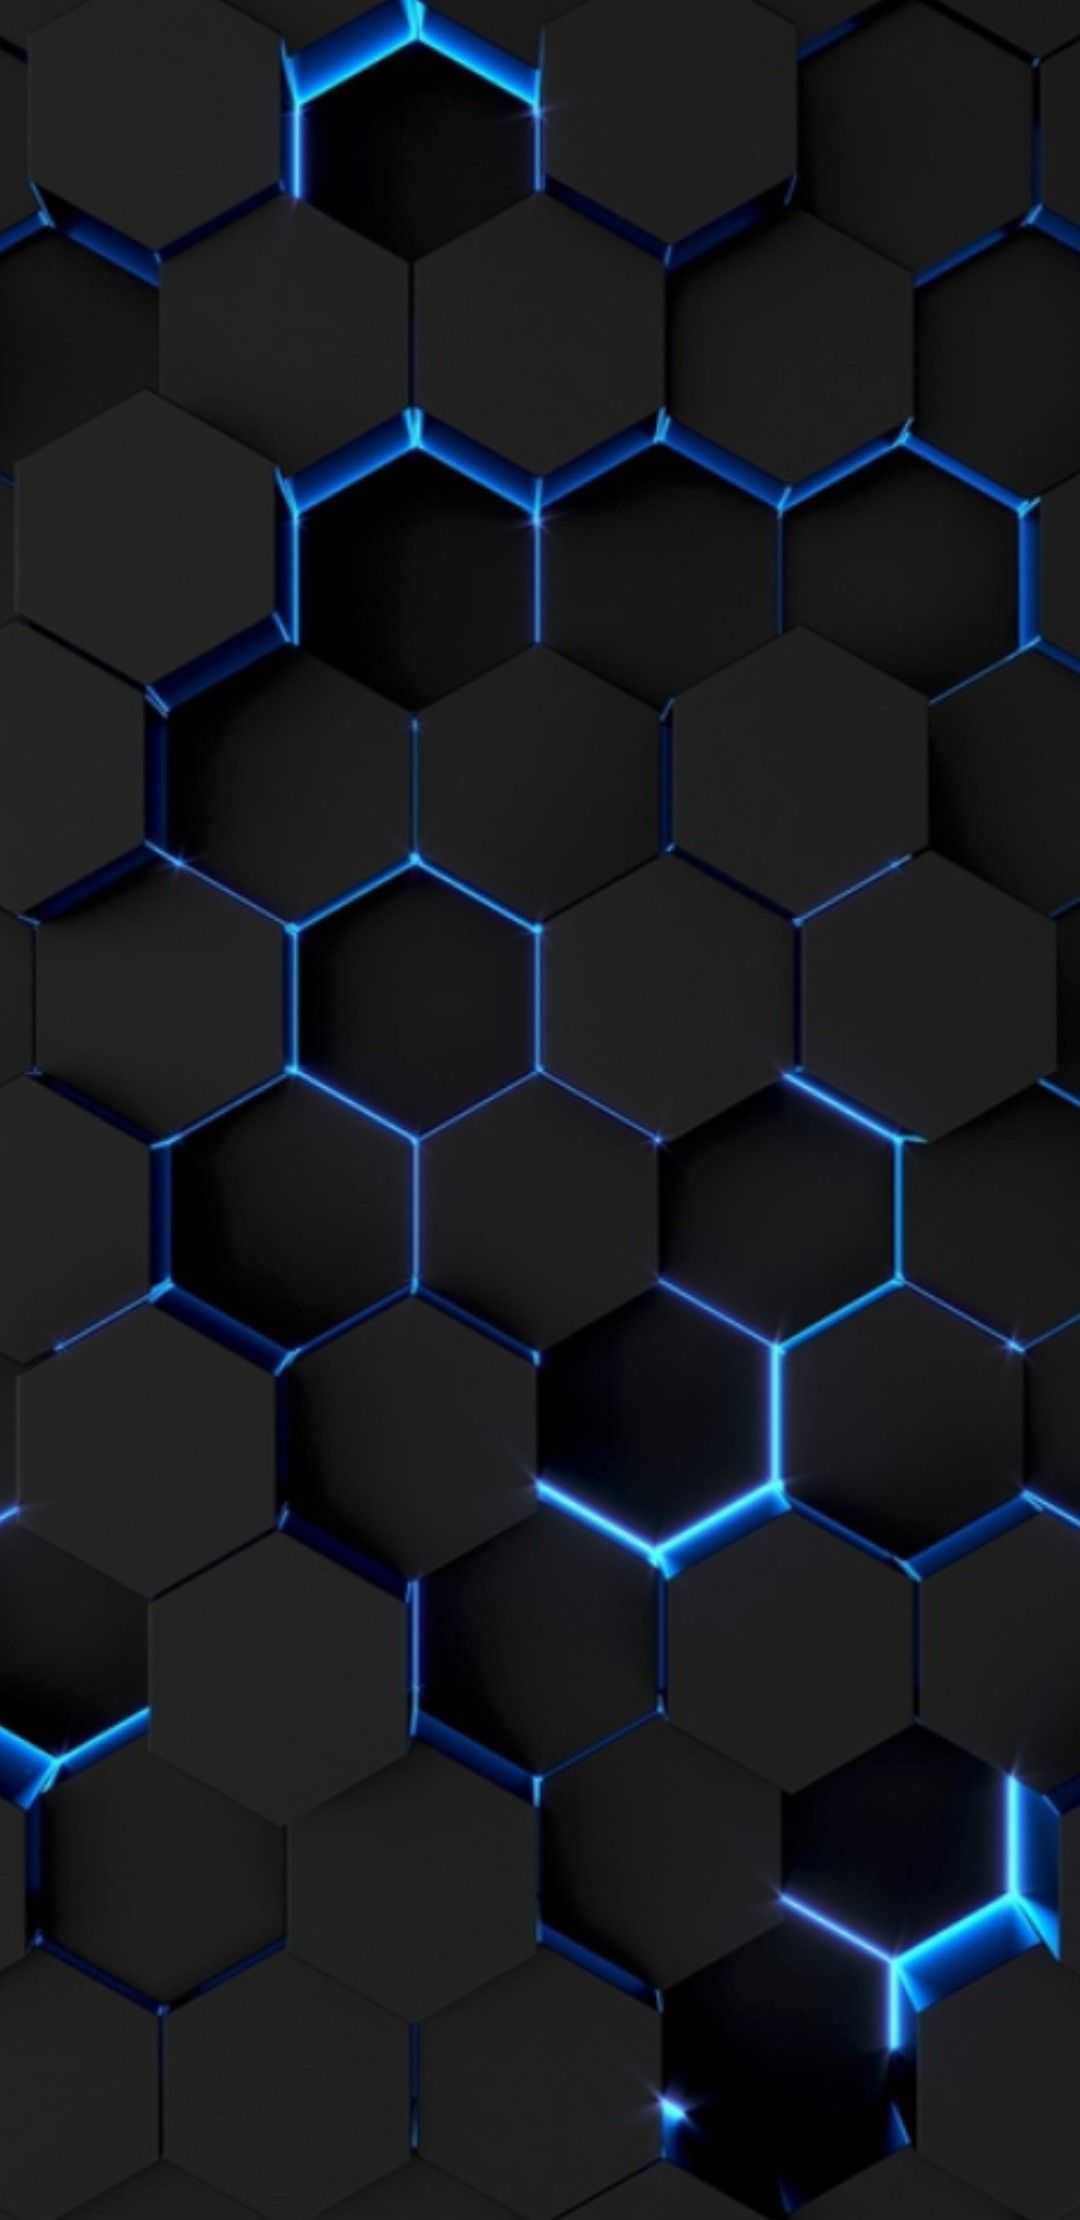 Black And Blue Wallpaper IPhone - iXpap